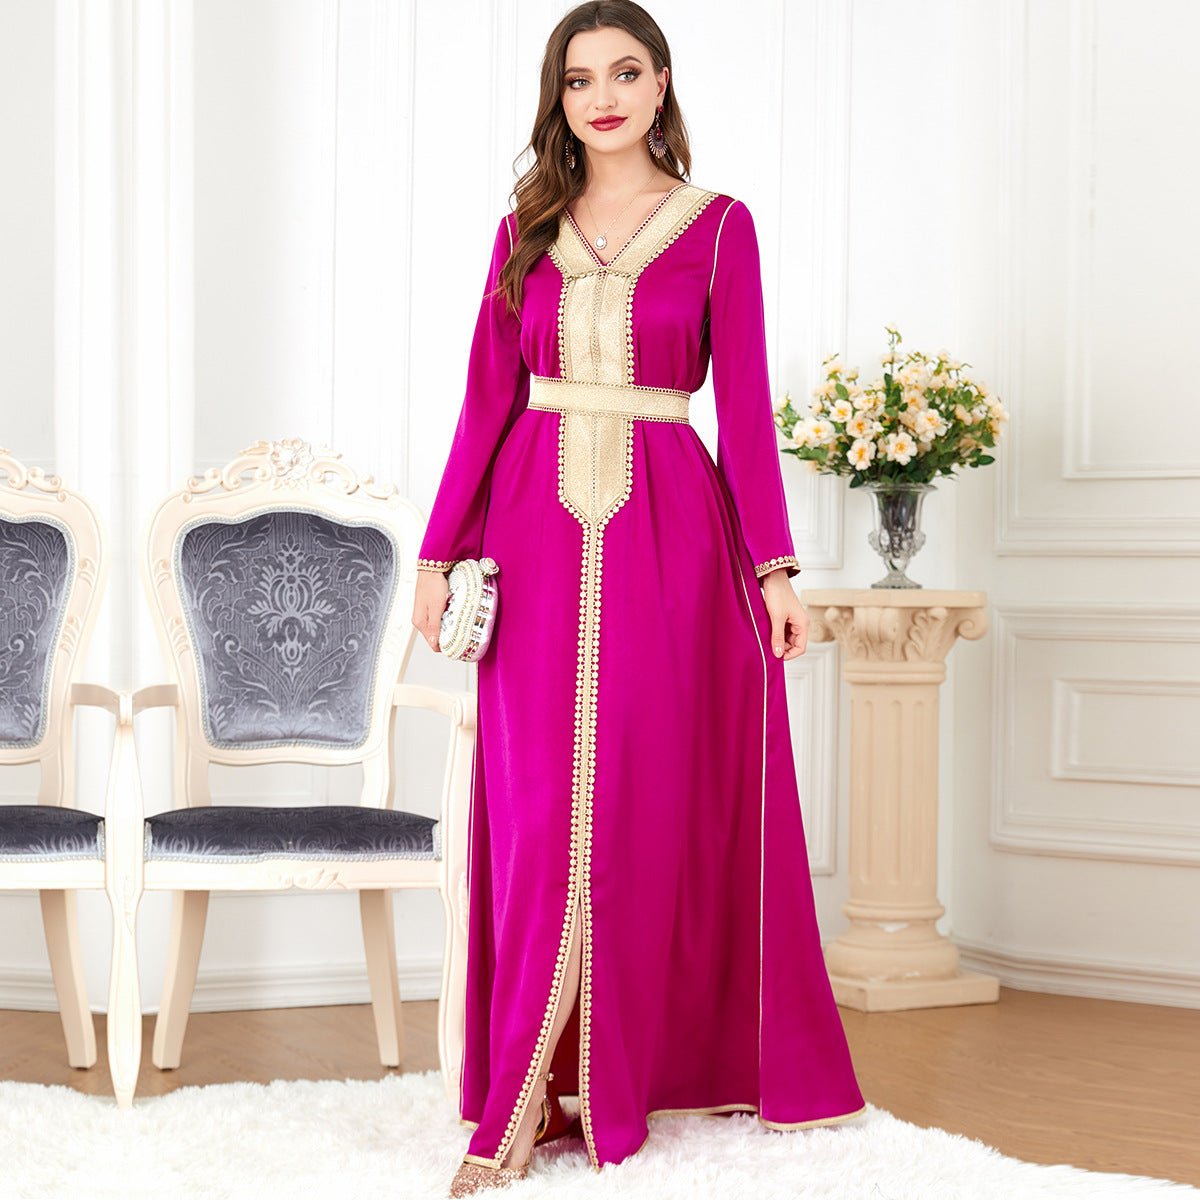 Women's Long Sleeve Solid Color Dress